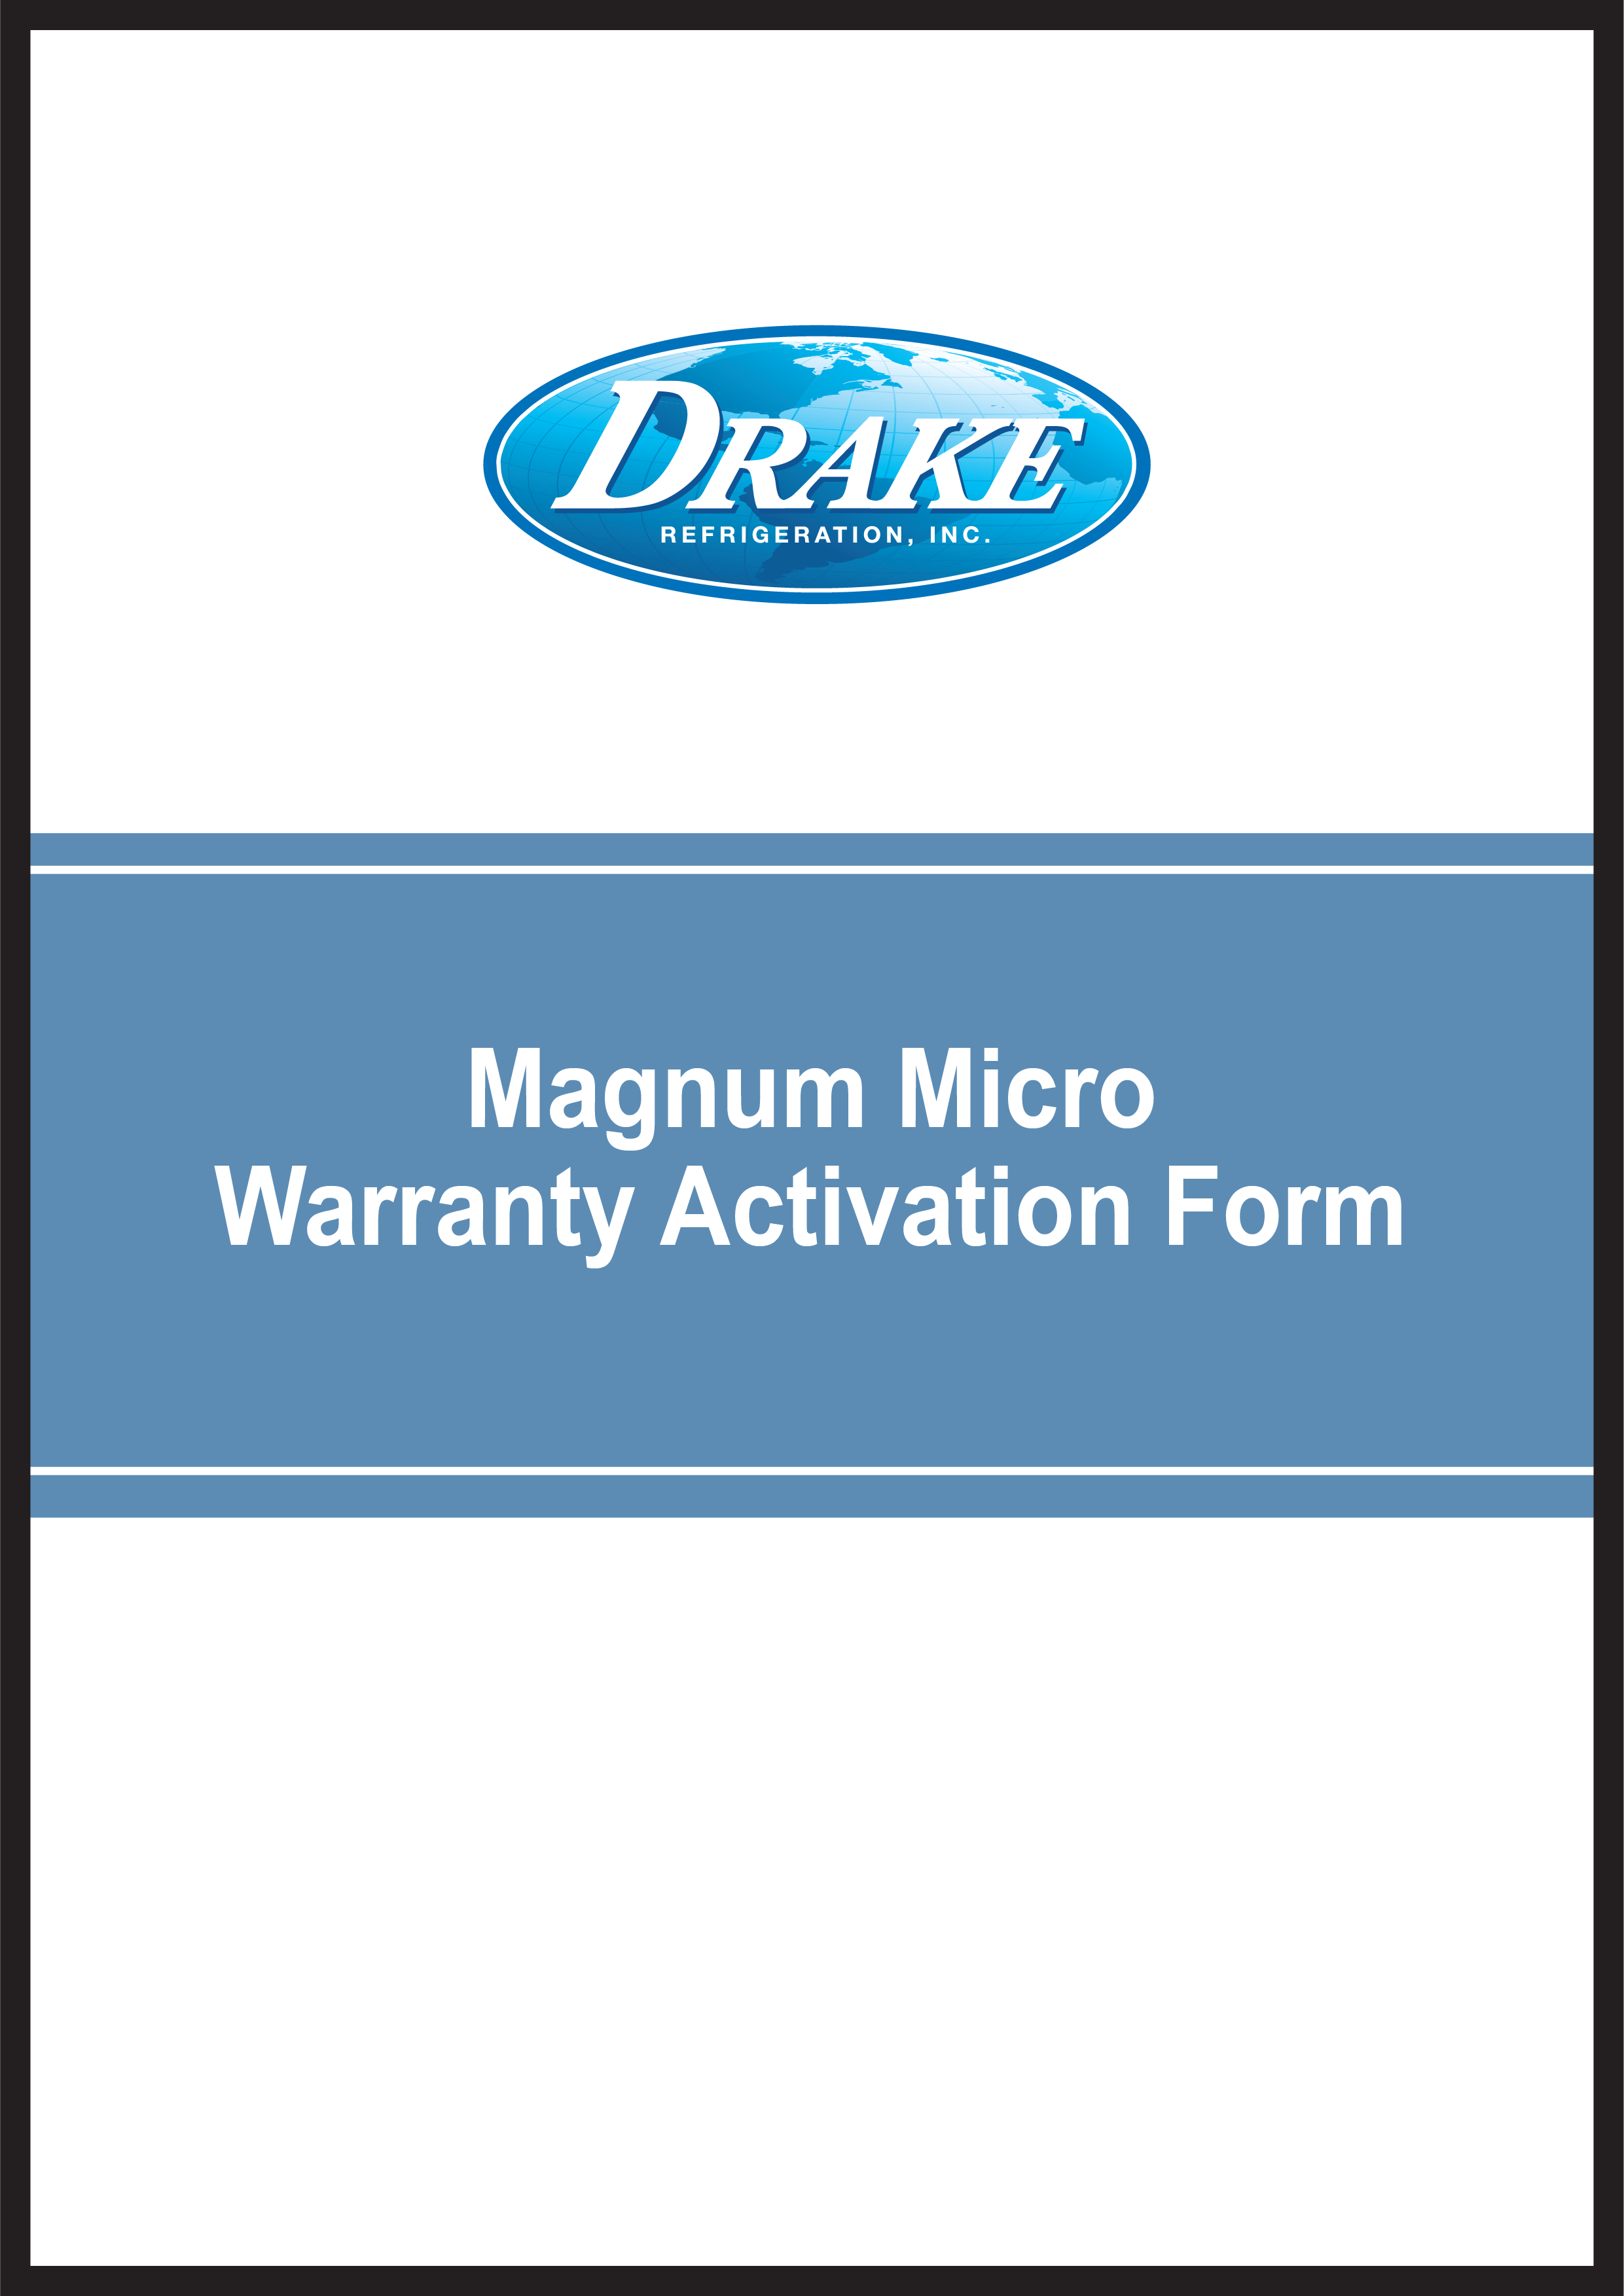 Web Template Magnum Micro Warranty Activation Form.png